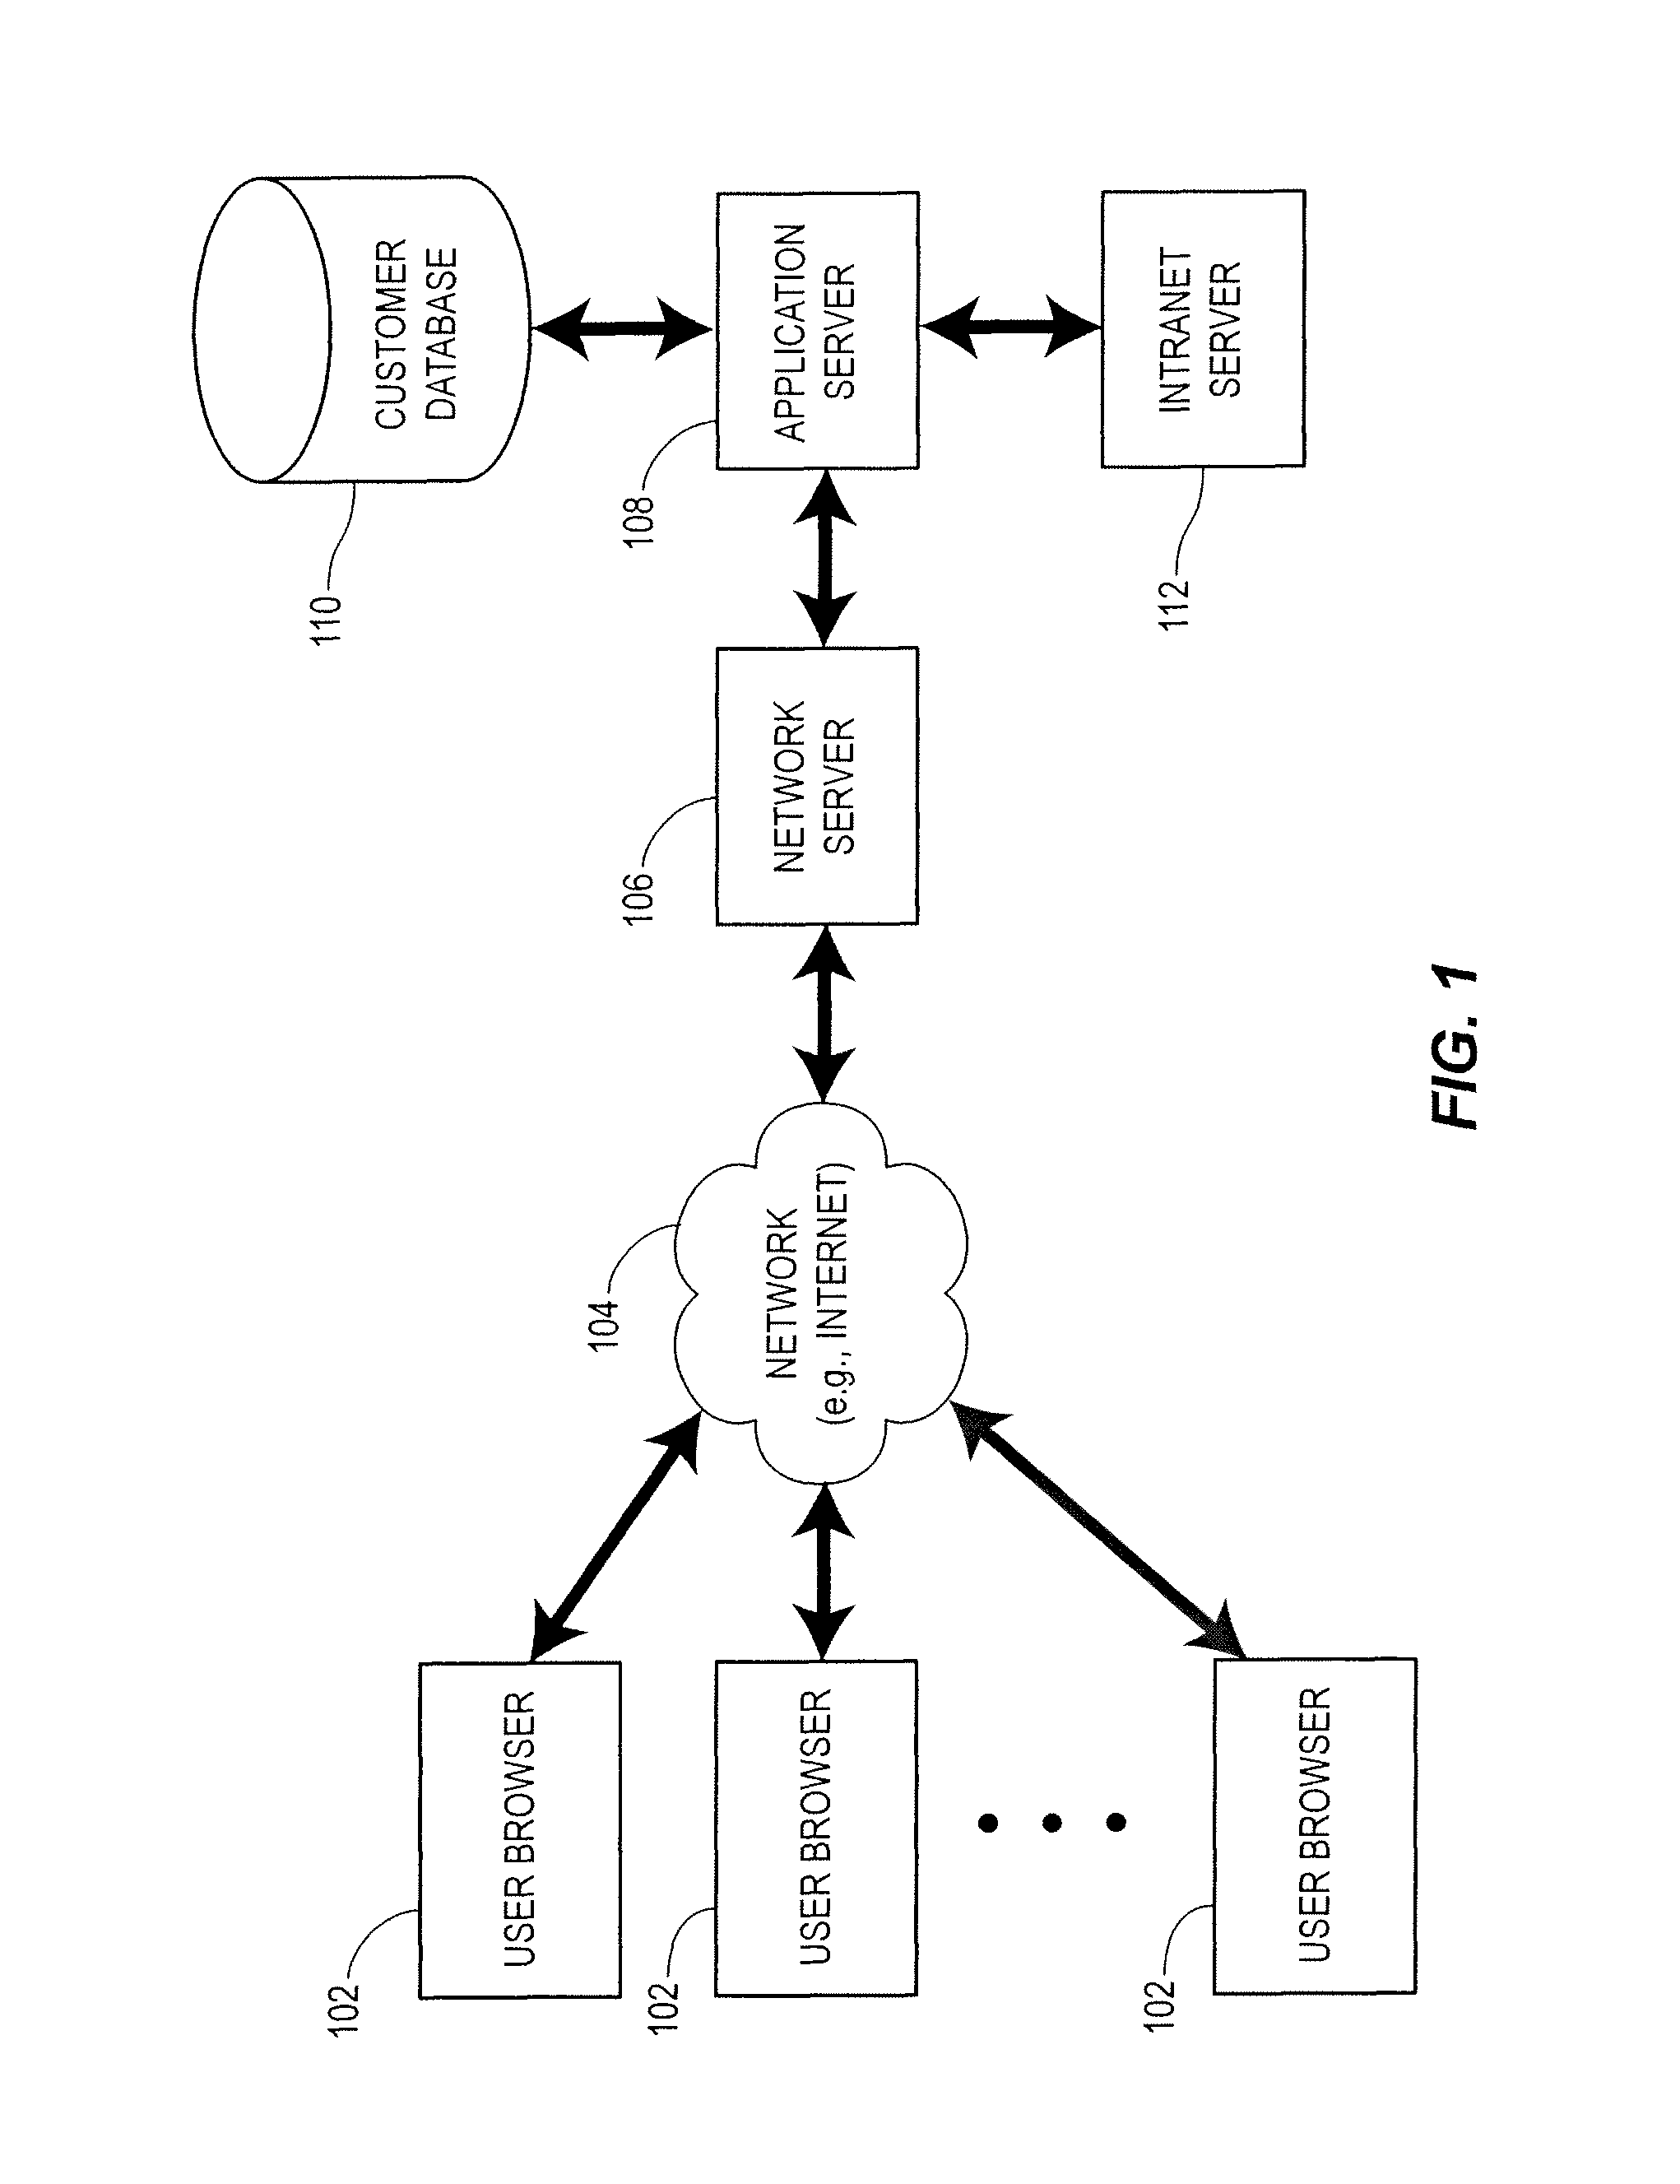 Apparatus and method for accessing pharmacy information and ordering prescriptions